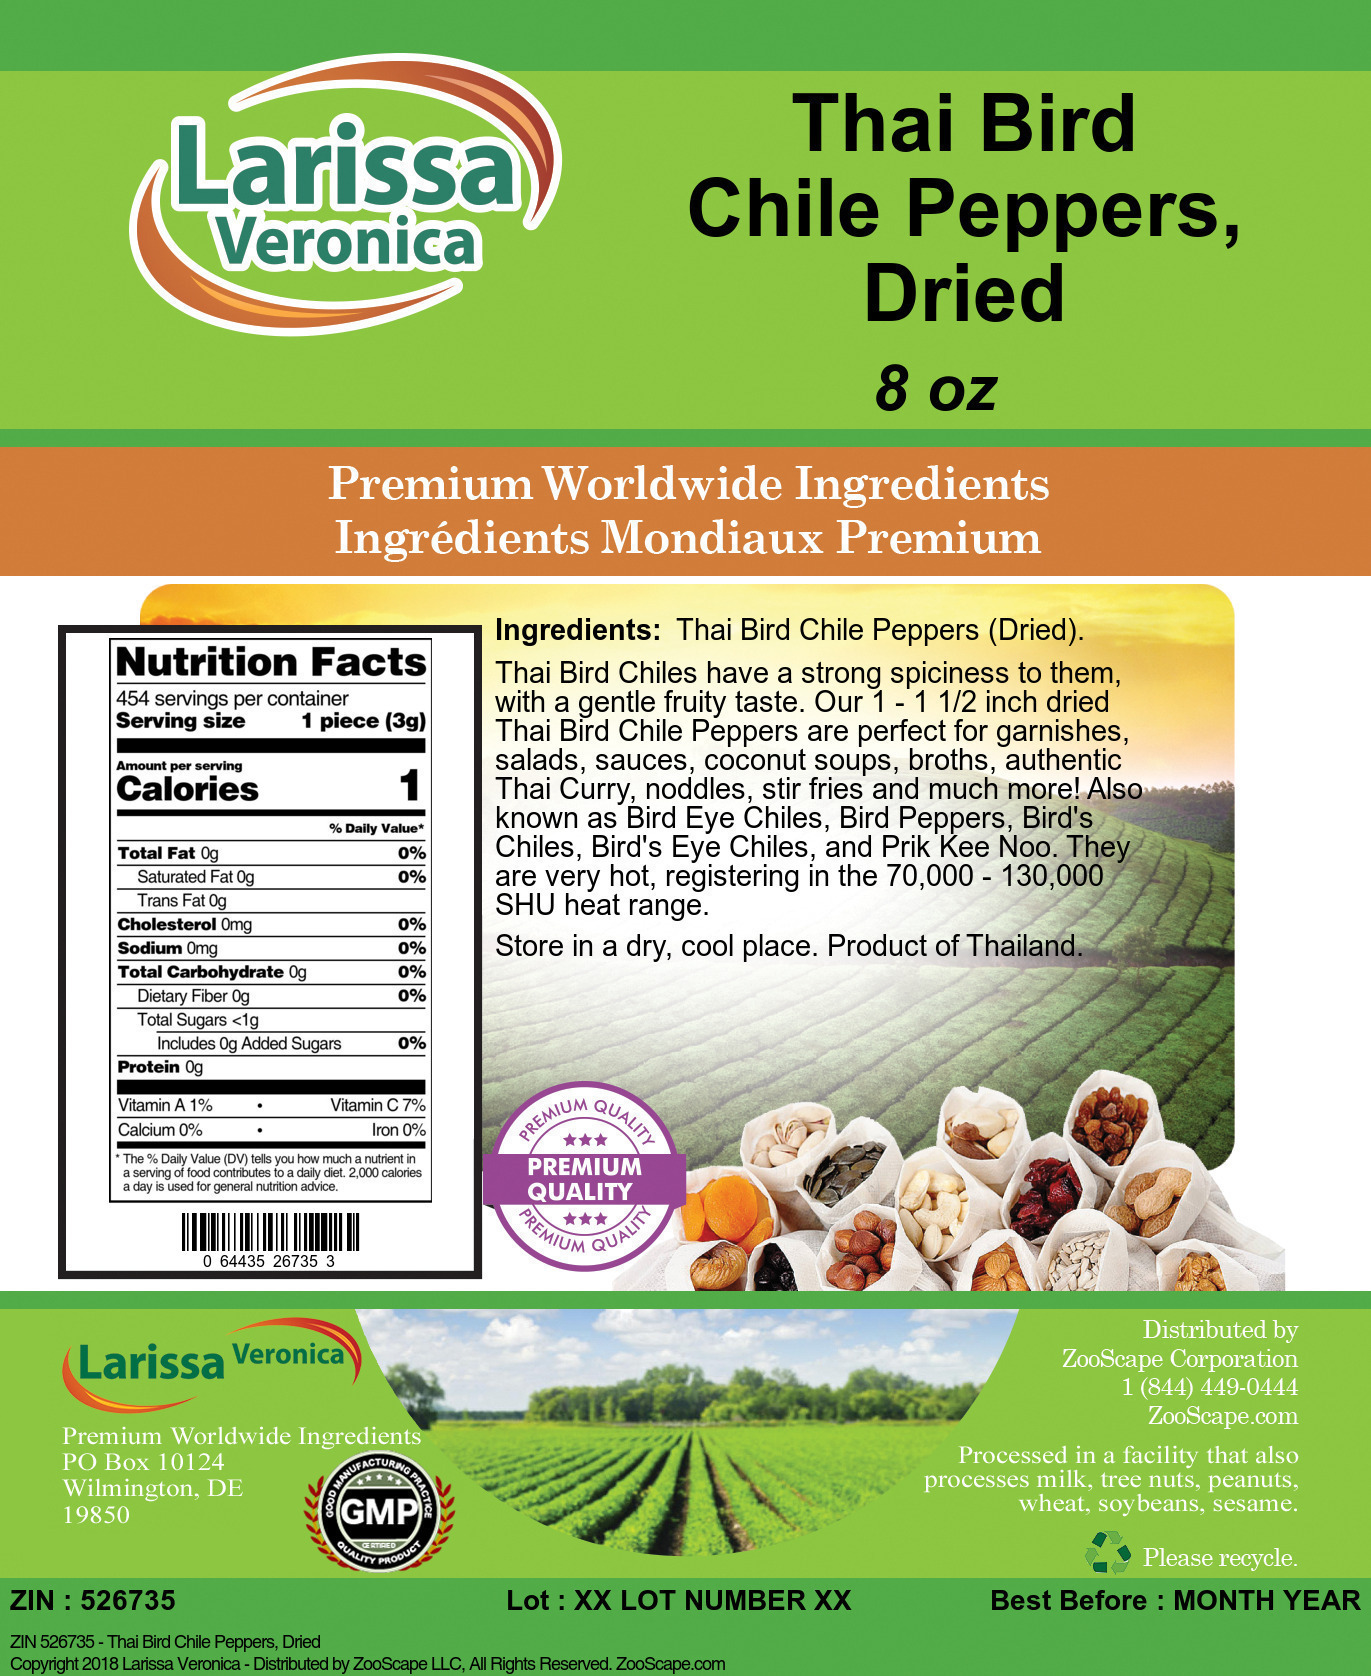 Thai Bird Chile Peppers, Dried - Label